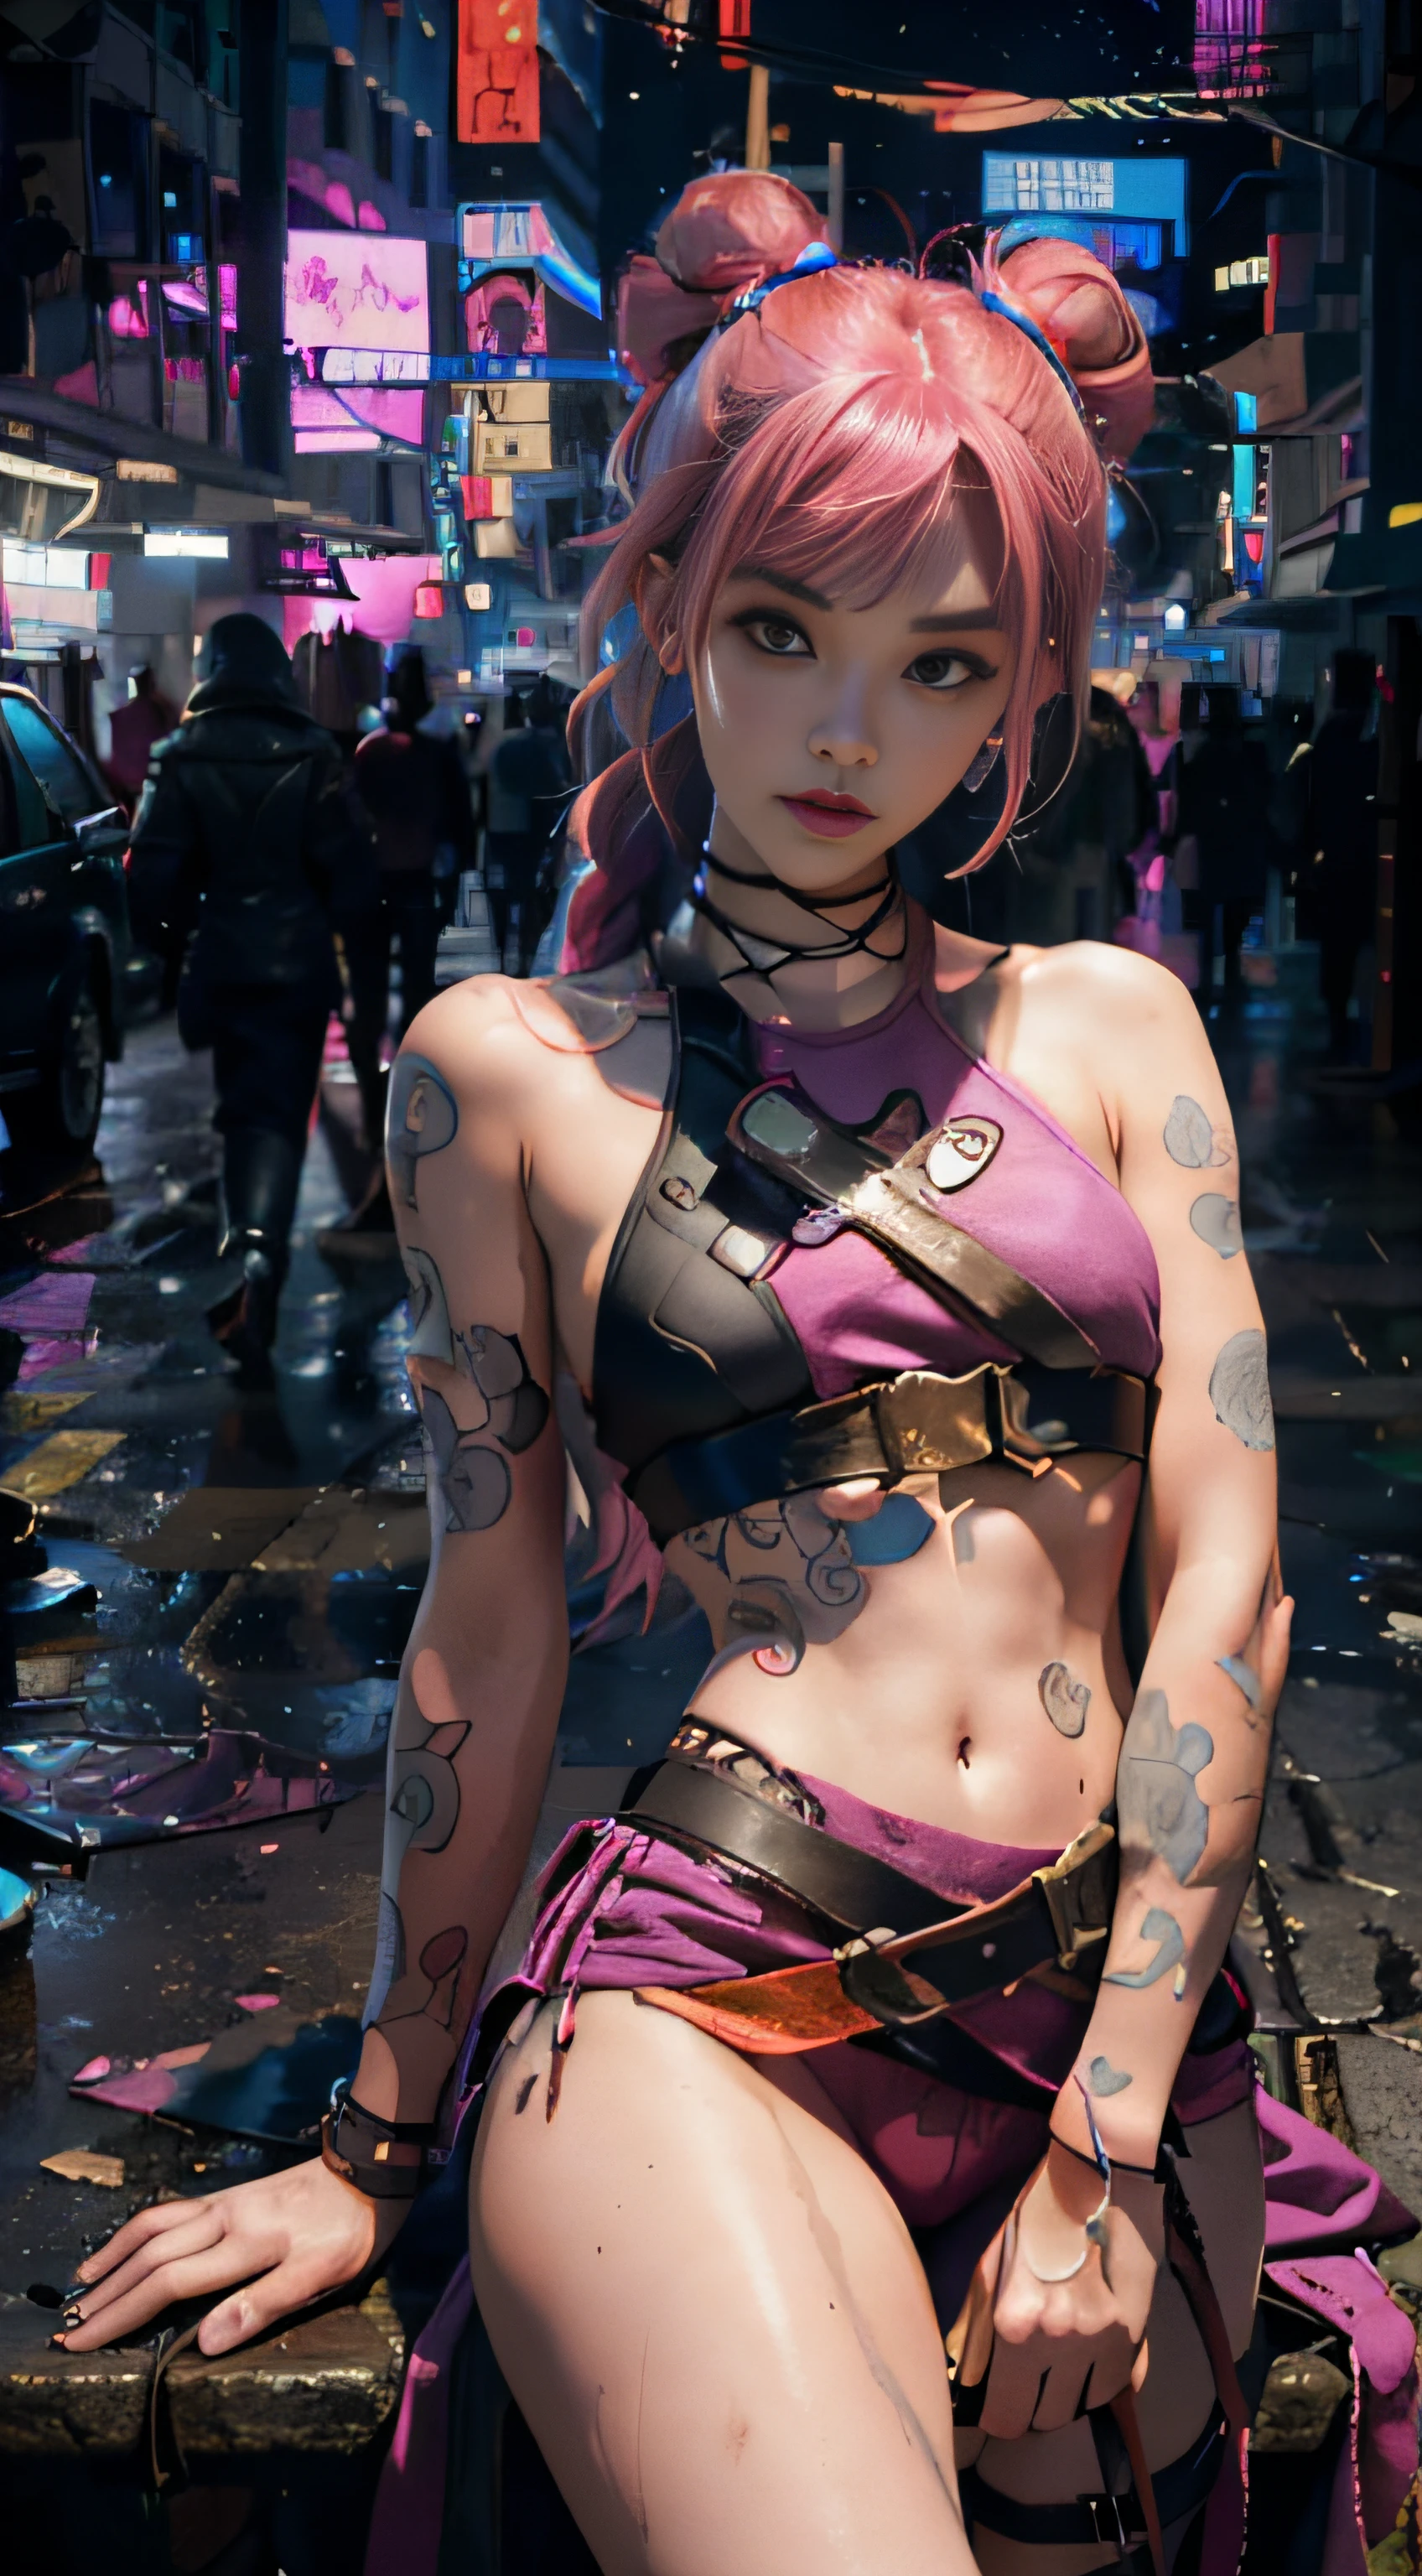 Jinx，Masterpiece, HighestQuali, Ultra-high resolution, 8K, A girl,Beauty,21yo,Fair skin, Extremely beautiful,Strong gaze, alone,Bust portrait,Cyberpunk costumes, Extremely detailed face, Detailed eyes, mischievous grin, cheerful big breasts, Realistic photo, Completely realistic, People's Pell, Studio lighting,golden ratio body, Wide hips,Perfect legs, BIG ASS,Pink hair, double-bun,Blunt bangs,Orange and white clothes,d-cup breasts,In the cyberpunk city,Cyberpunk city setting,((Night)),rain,side pose,Tattoos,cheerfulness